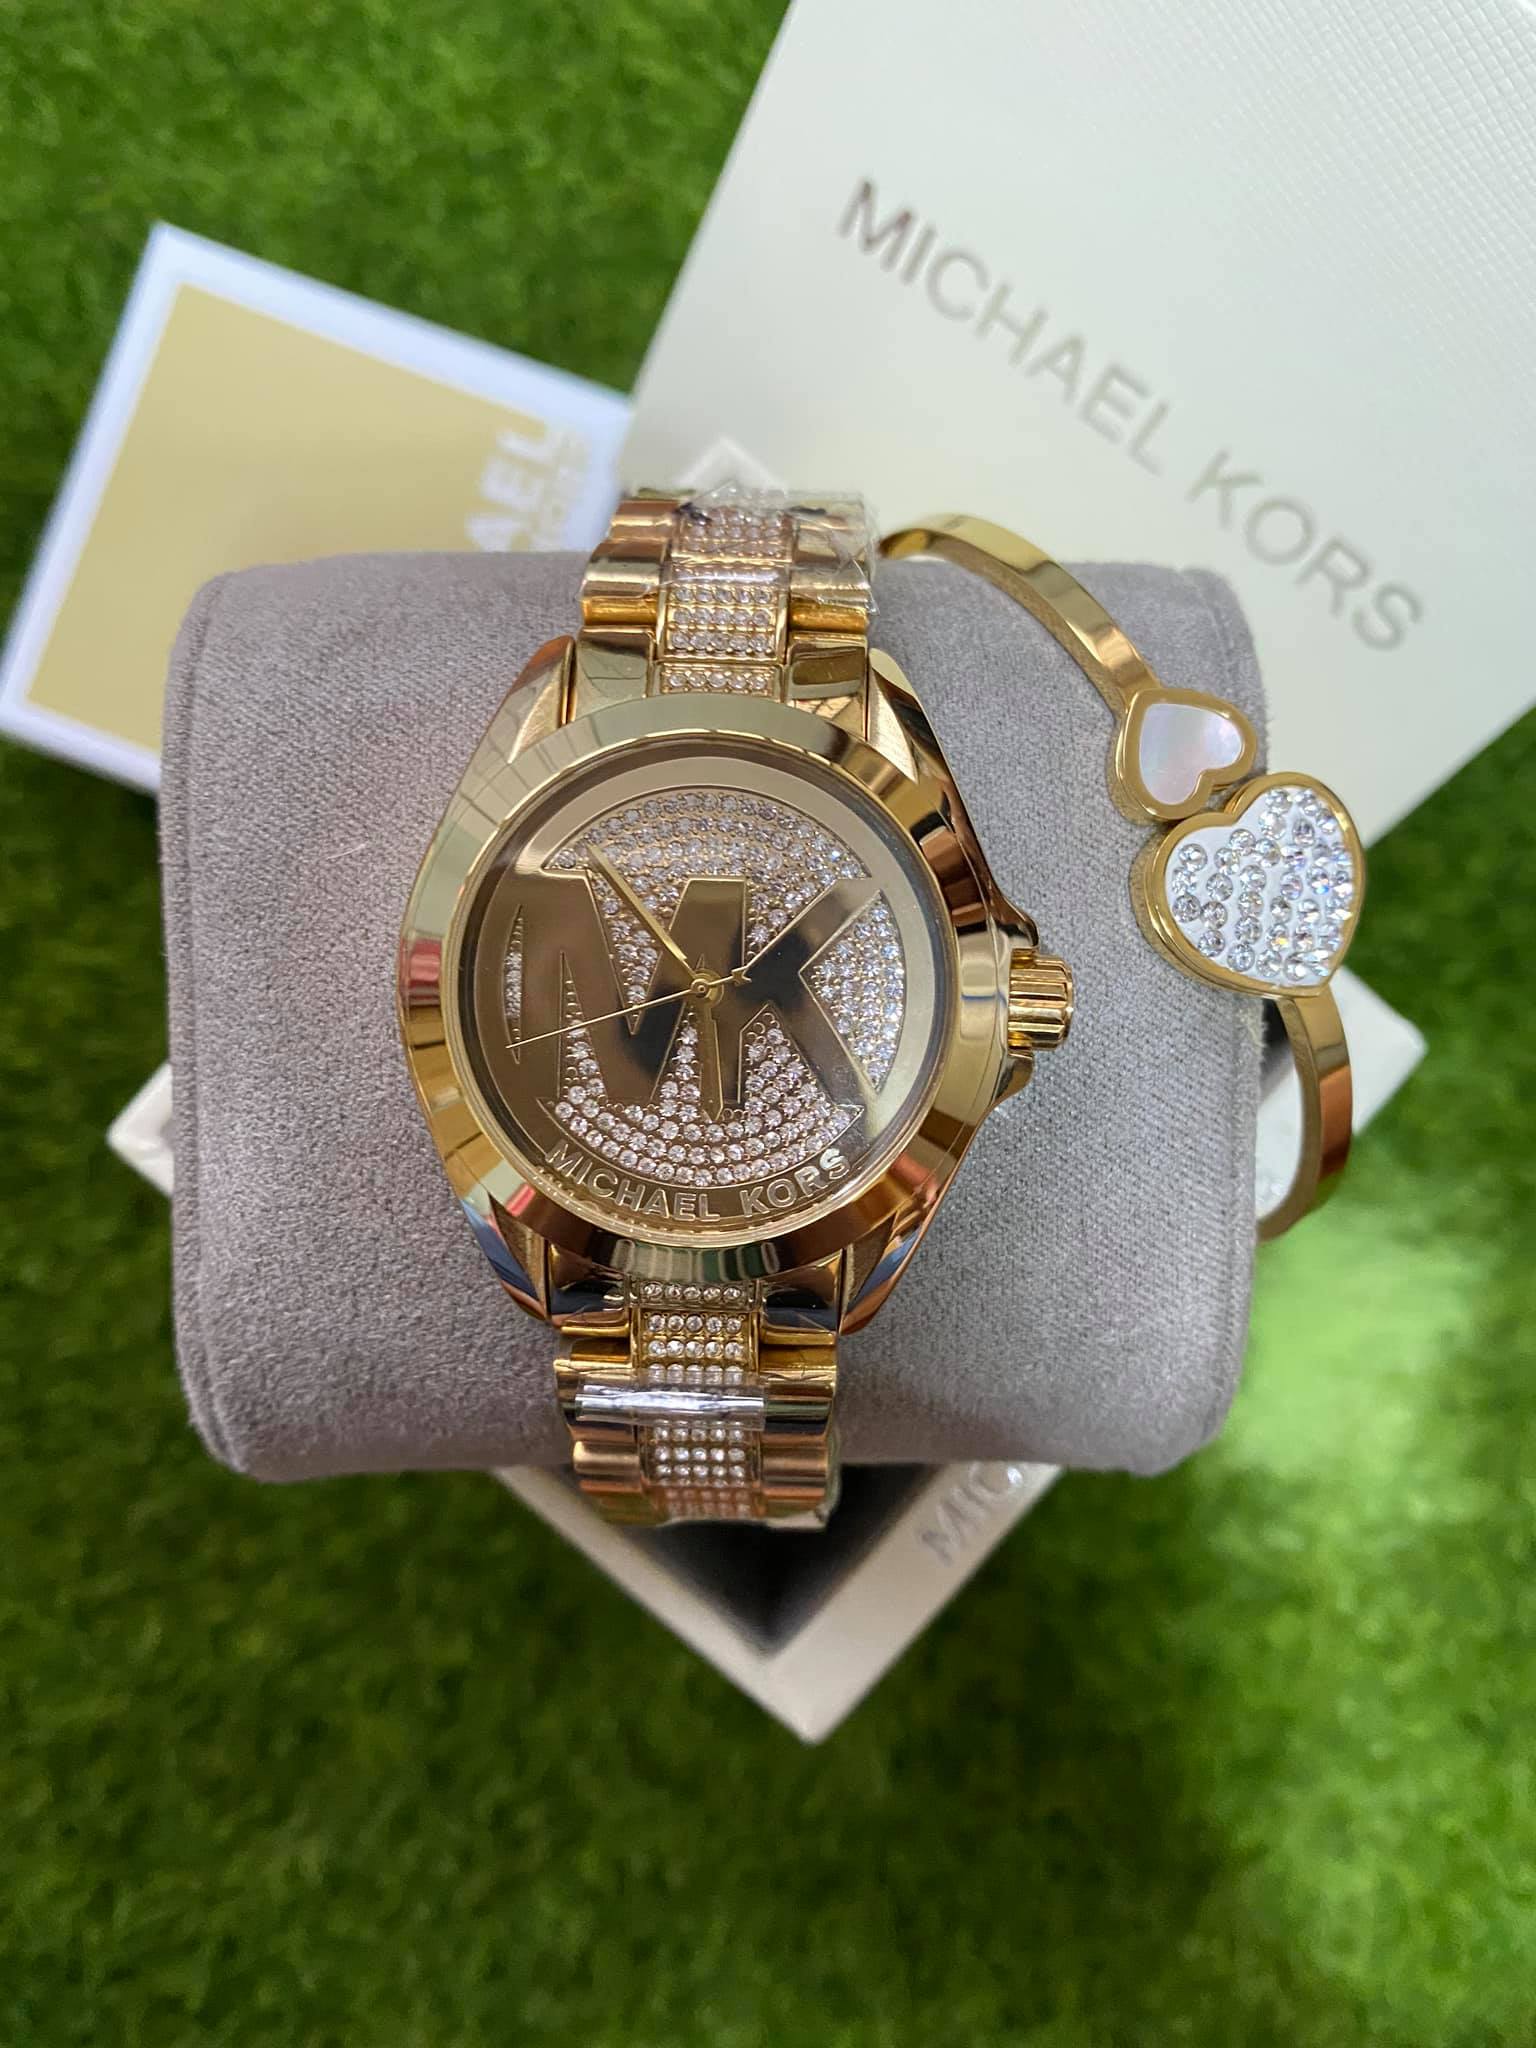 Michael Kors Watches in NZ Fashion and Smartwatches  30Day Returns  2Year Guarantee Free Delivery from NZ Approved Retailer